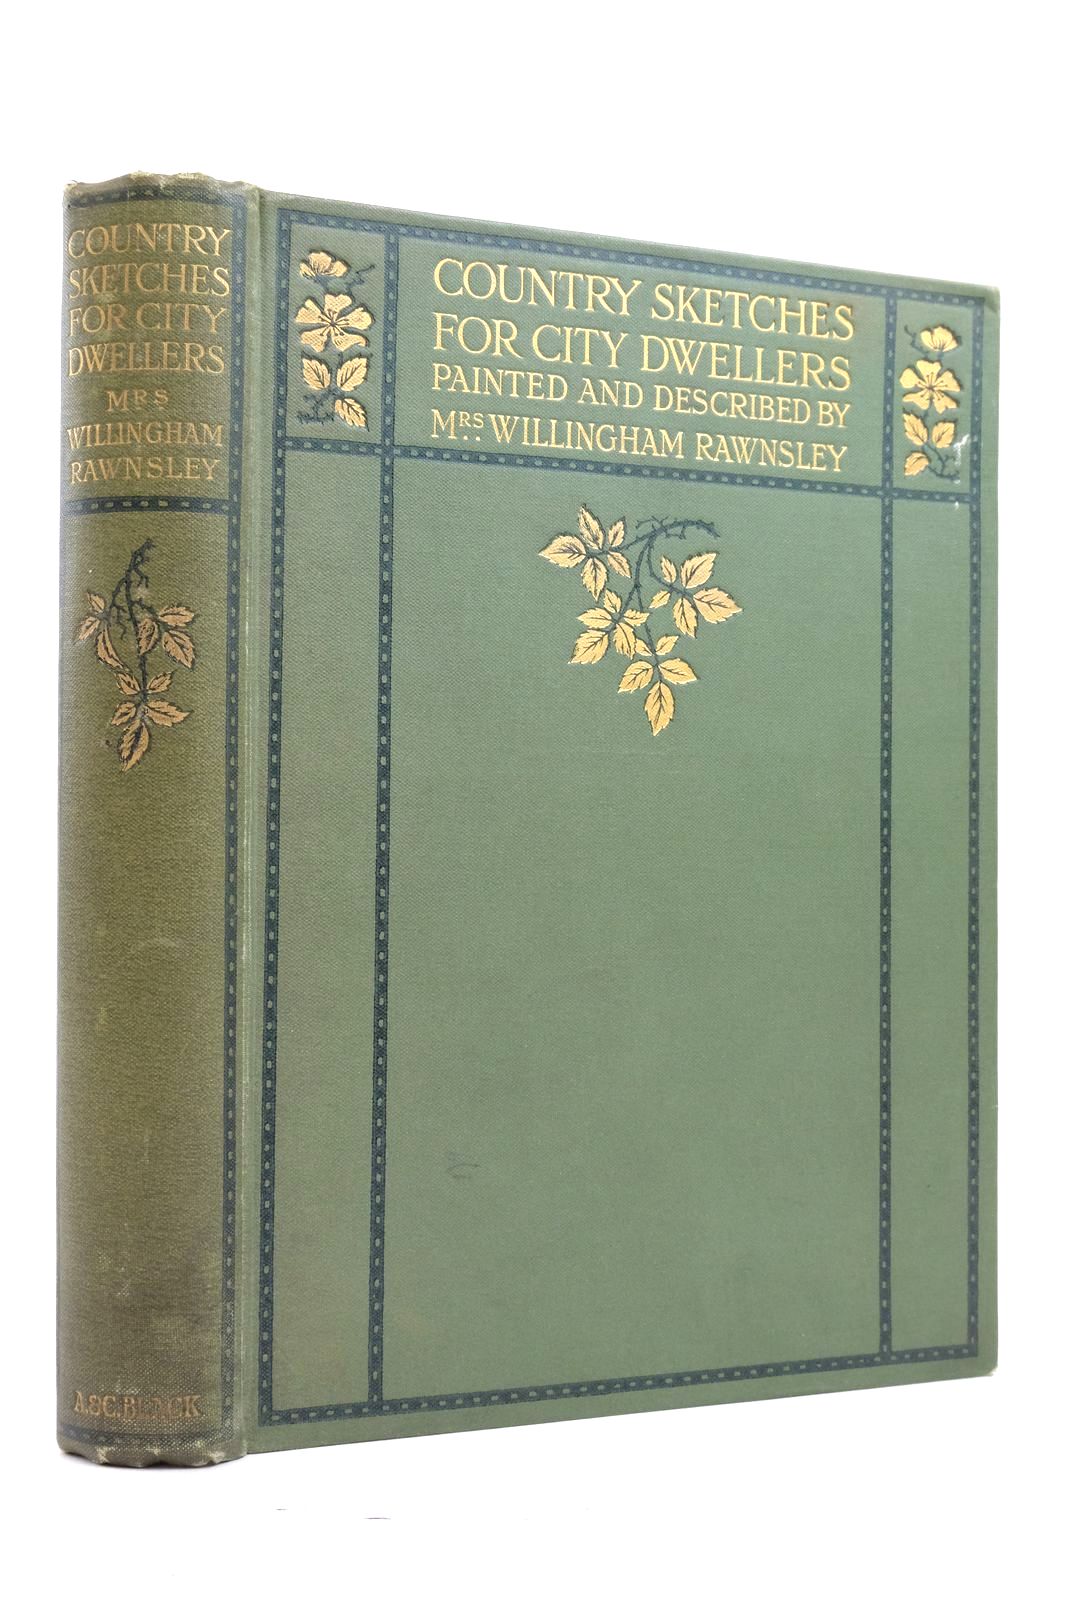 Photo of COUNTRY SKETCHES FOR CITY DWELLERS- Stock Number: 2137223